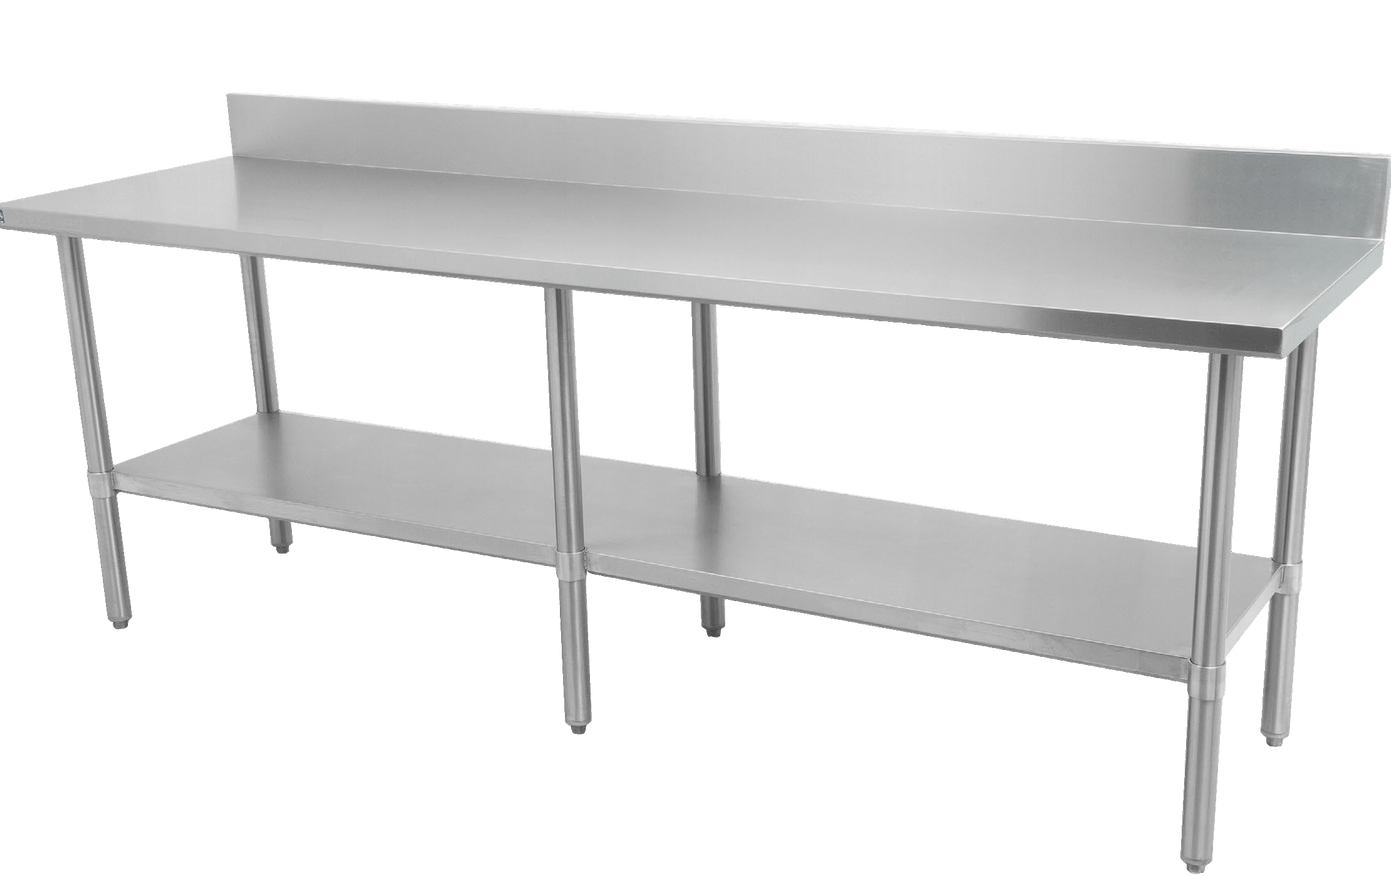 Thorinox DSST-3072-BK Table, 72"W x 30"D x 39"H, Stainless Steel Table with Backsplash and Galvanized Shelf